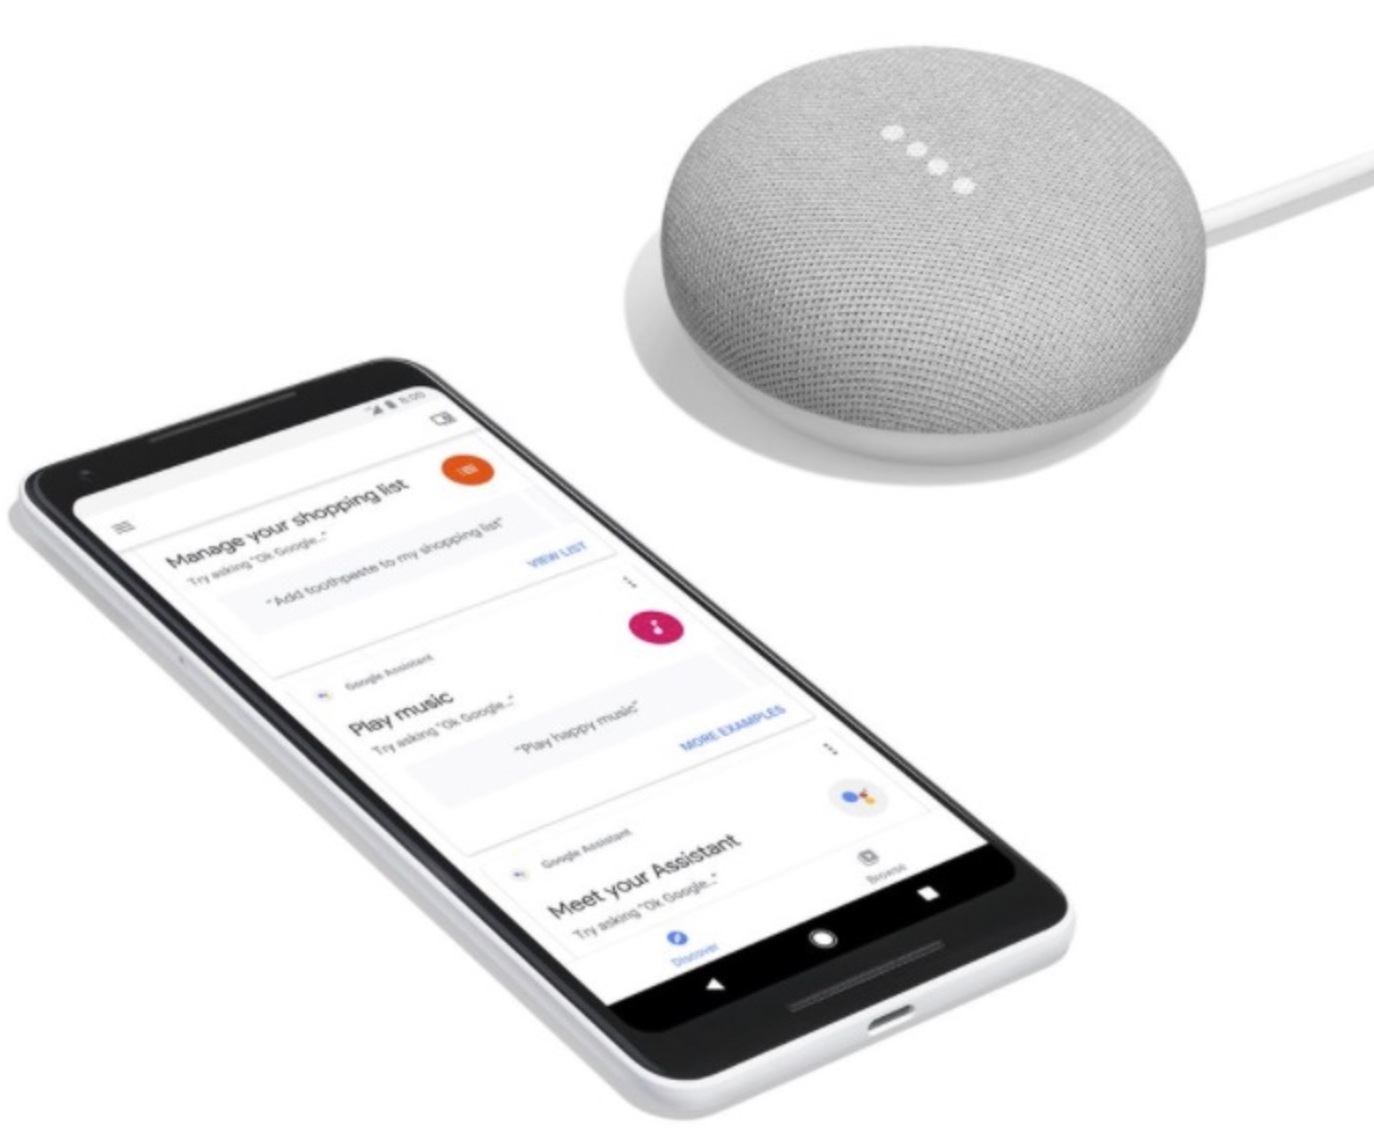 Walmart Just Leaked Google’s Stuff A Day Early